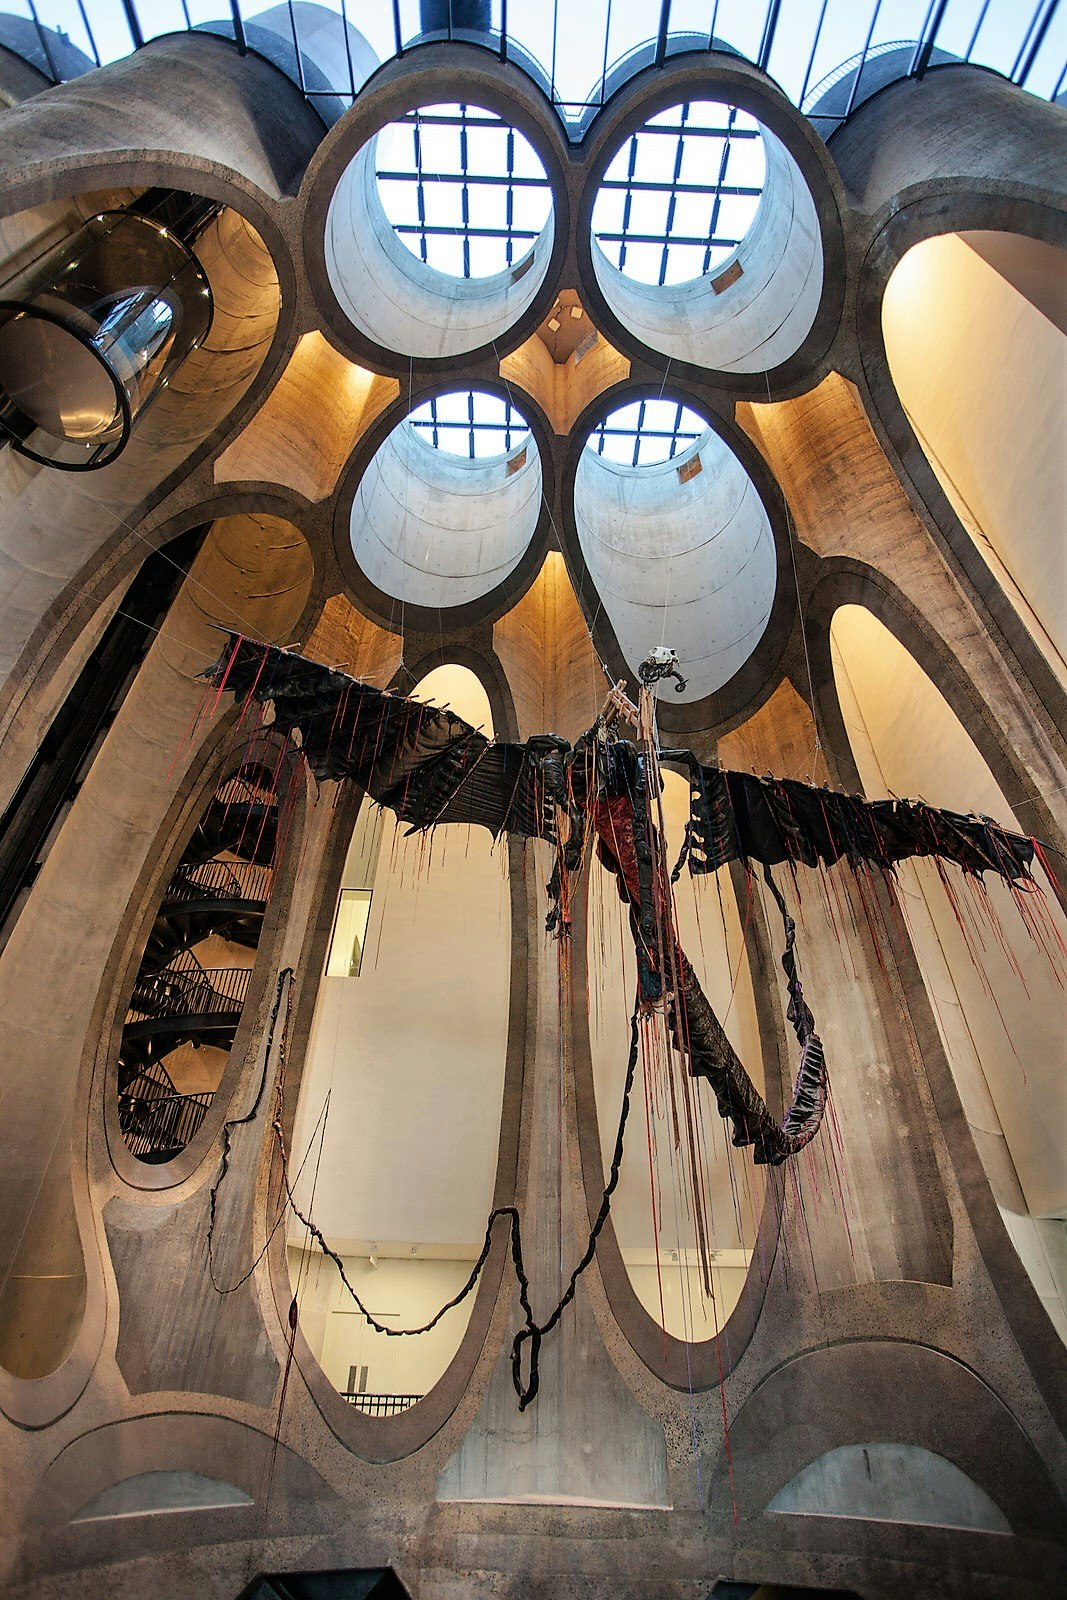 The interior of Cape Town's Zeitz MOCAA Museum, housed in a former silo